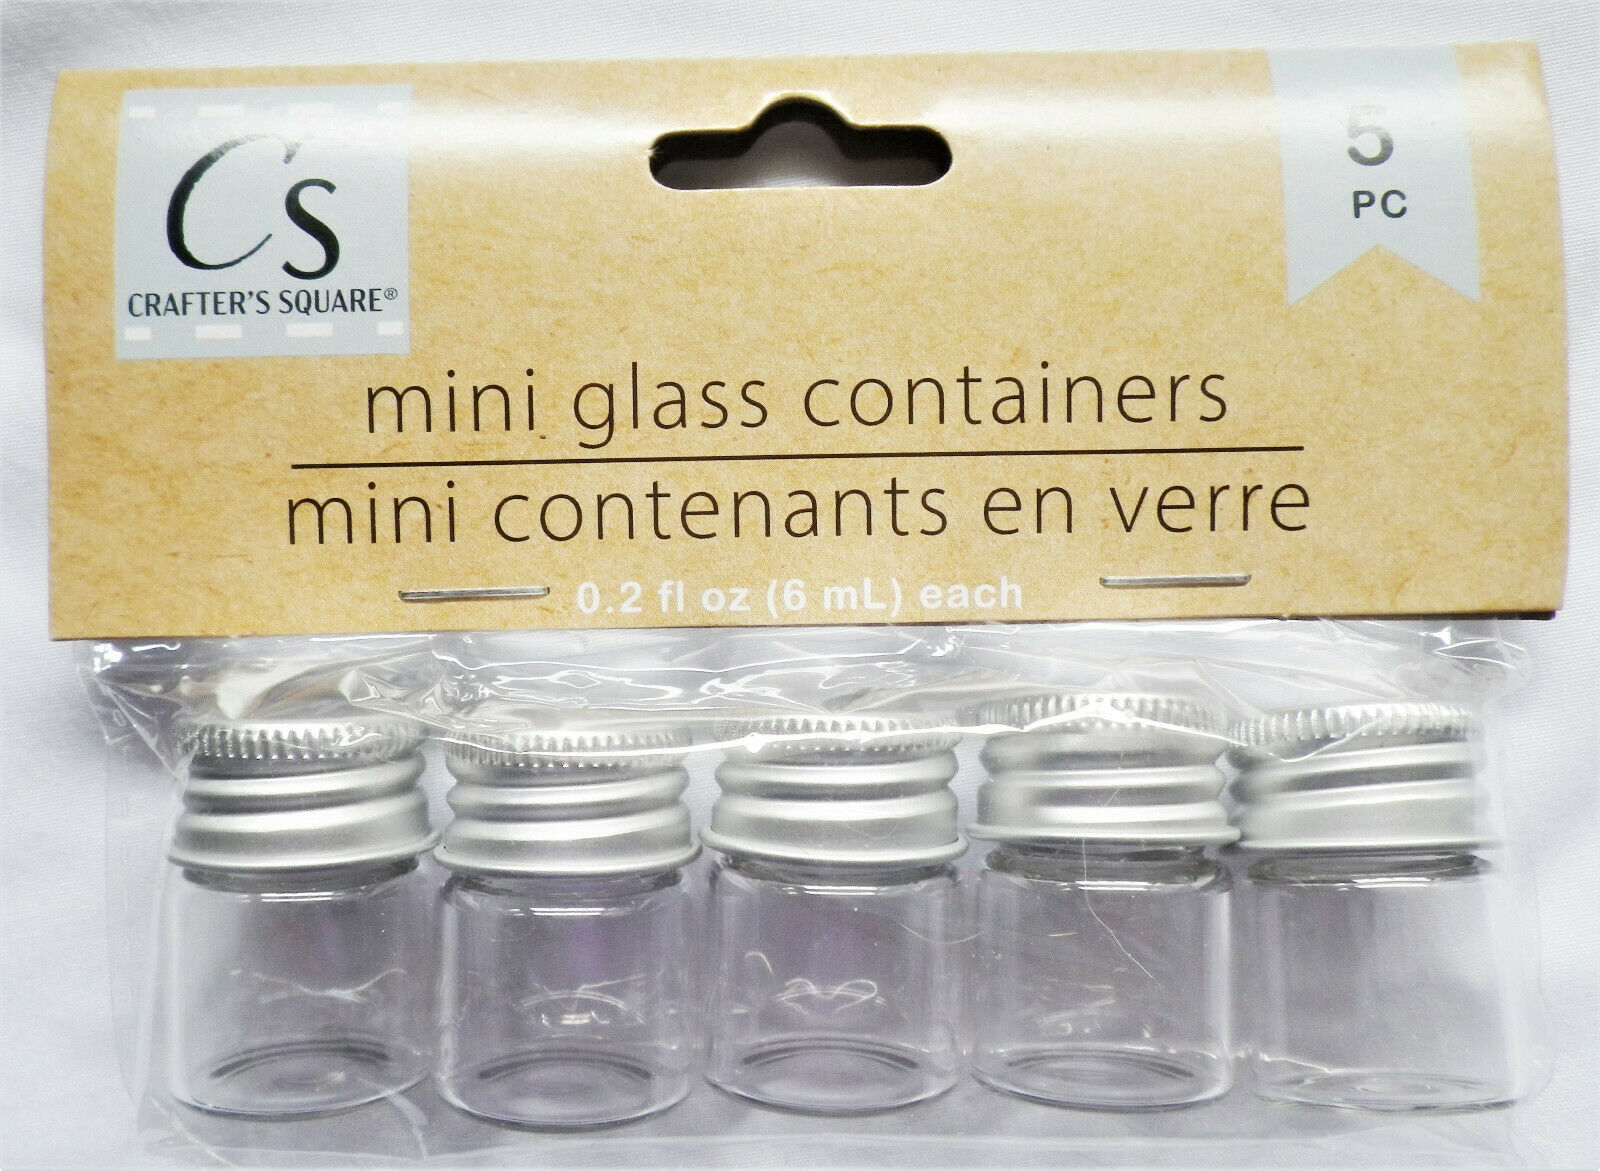 New Crafters Square 6 Mini Glass Containers Jars With Silver Lids 1.25" Long